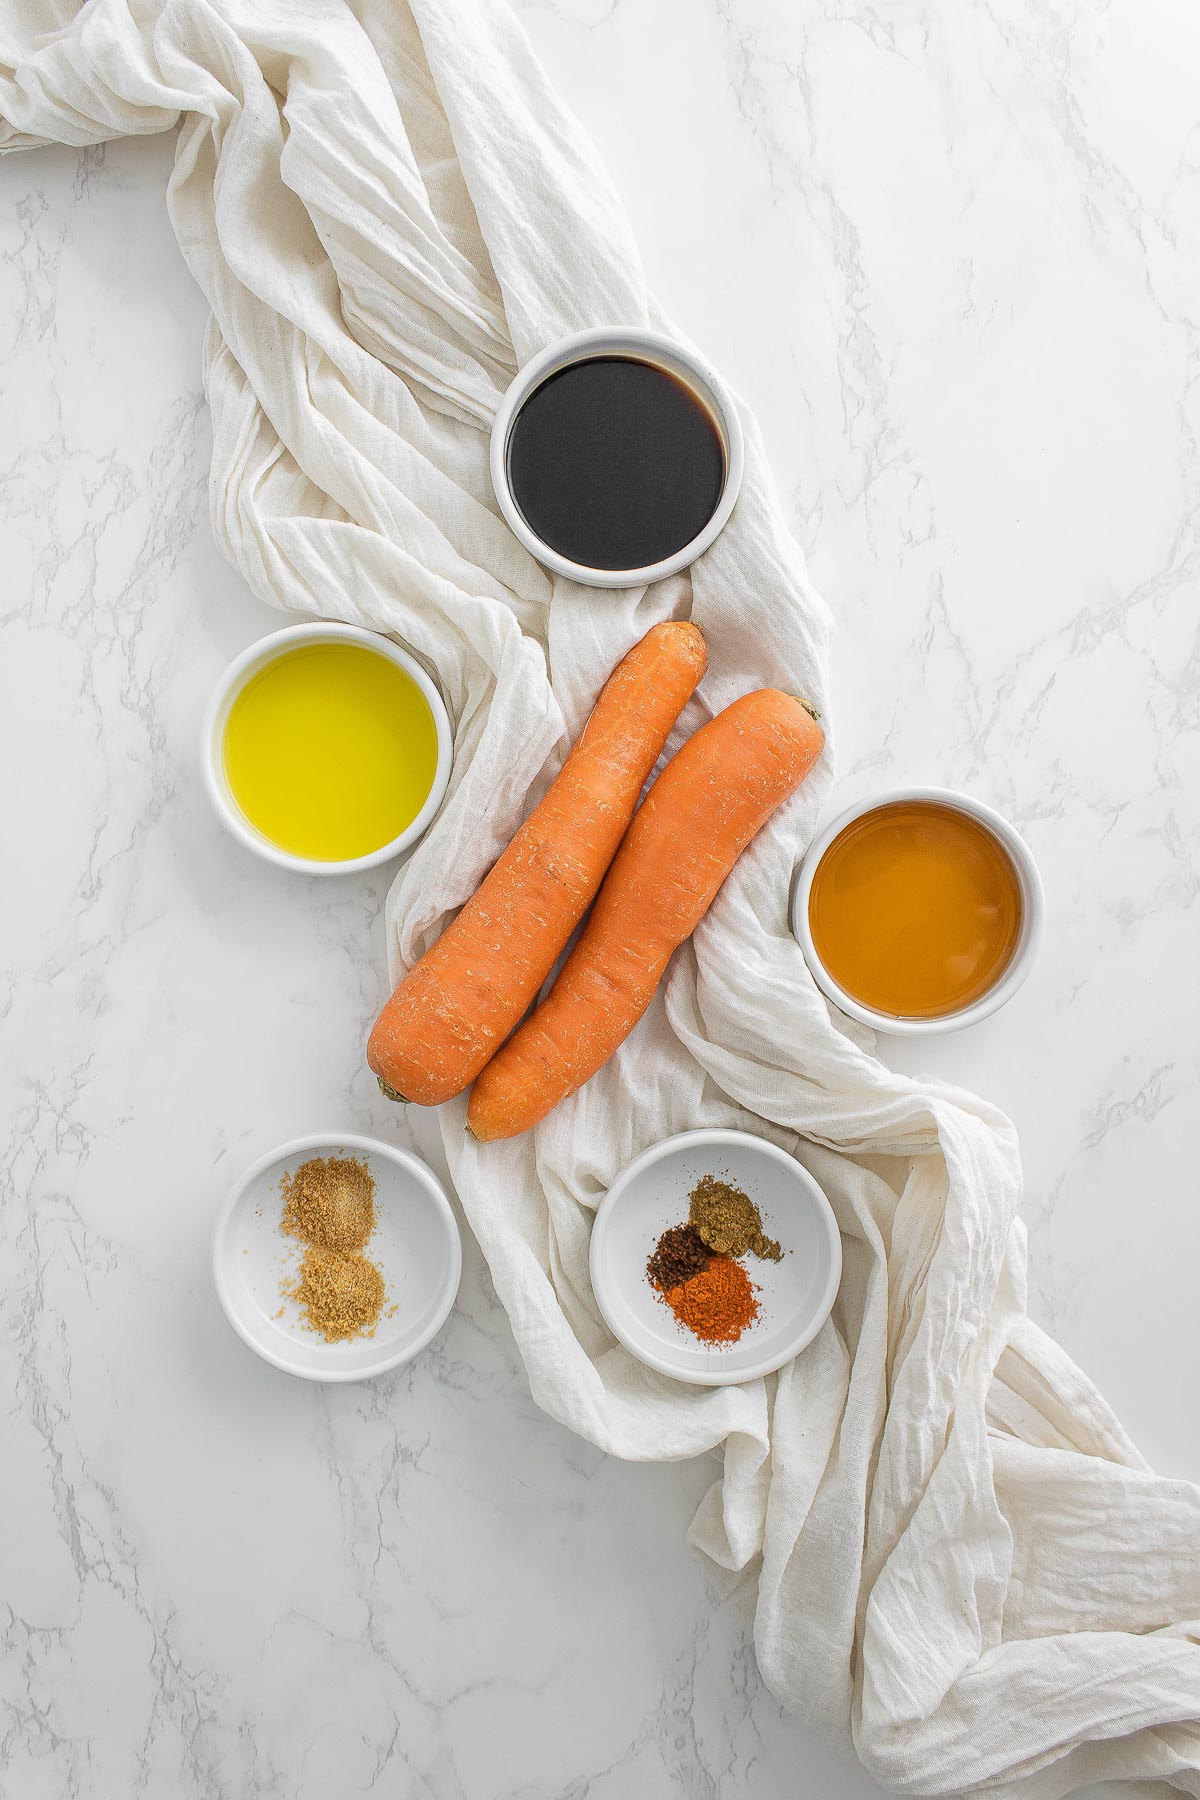 ingredient laid out to make vegan bacon - carrots, soy sauce, olive oil, maple syrup, liquid smoke and spices.